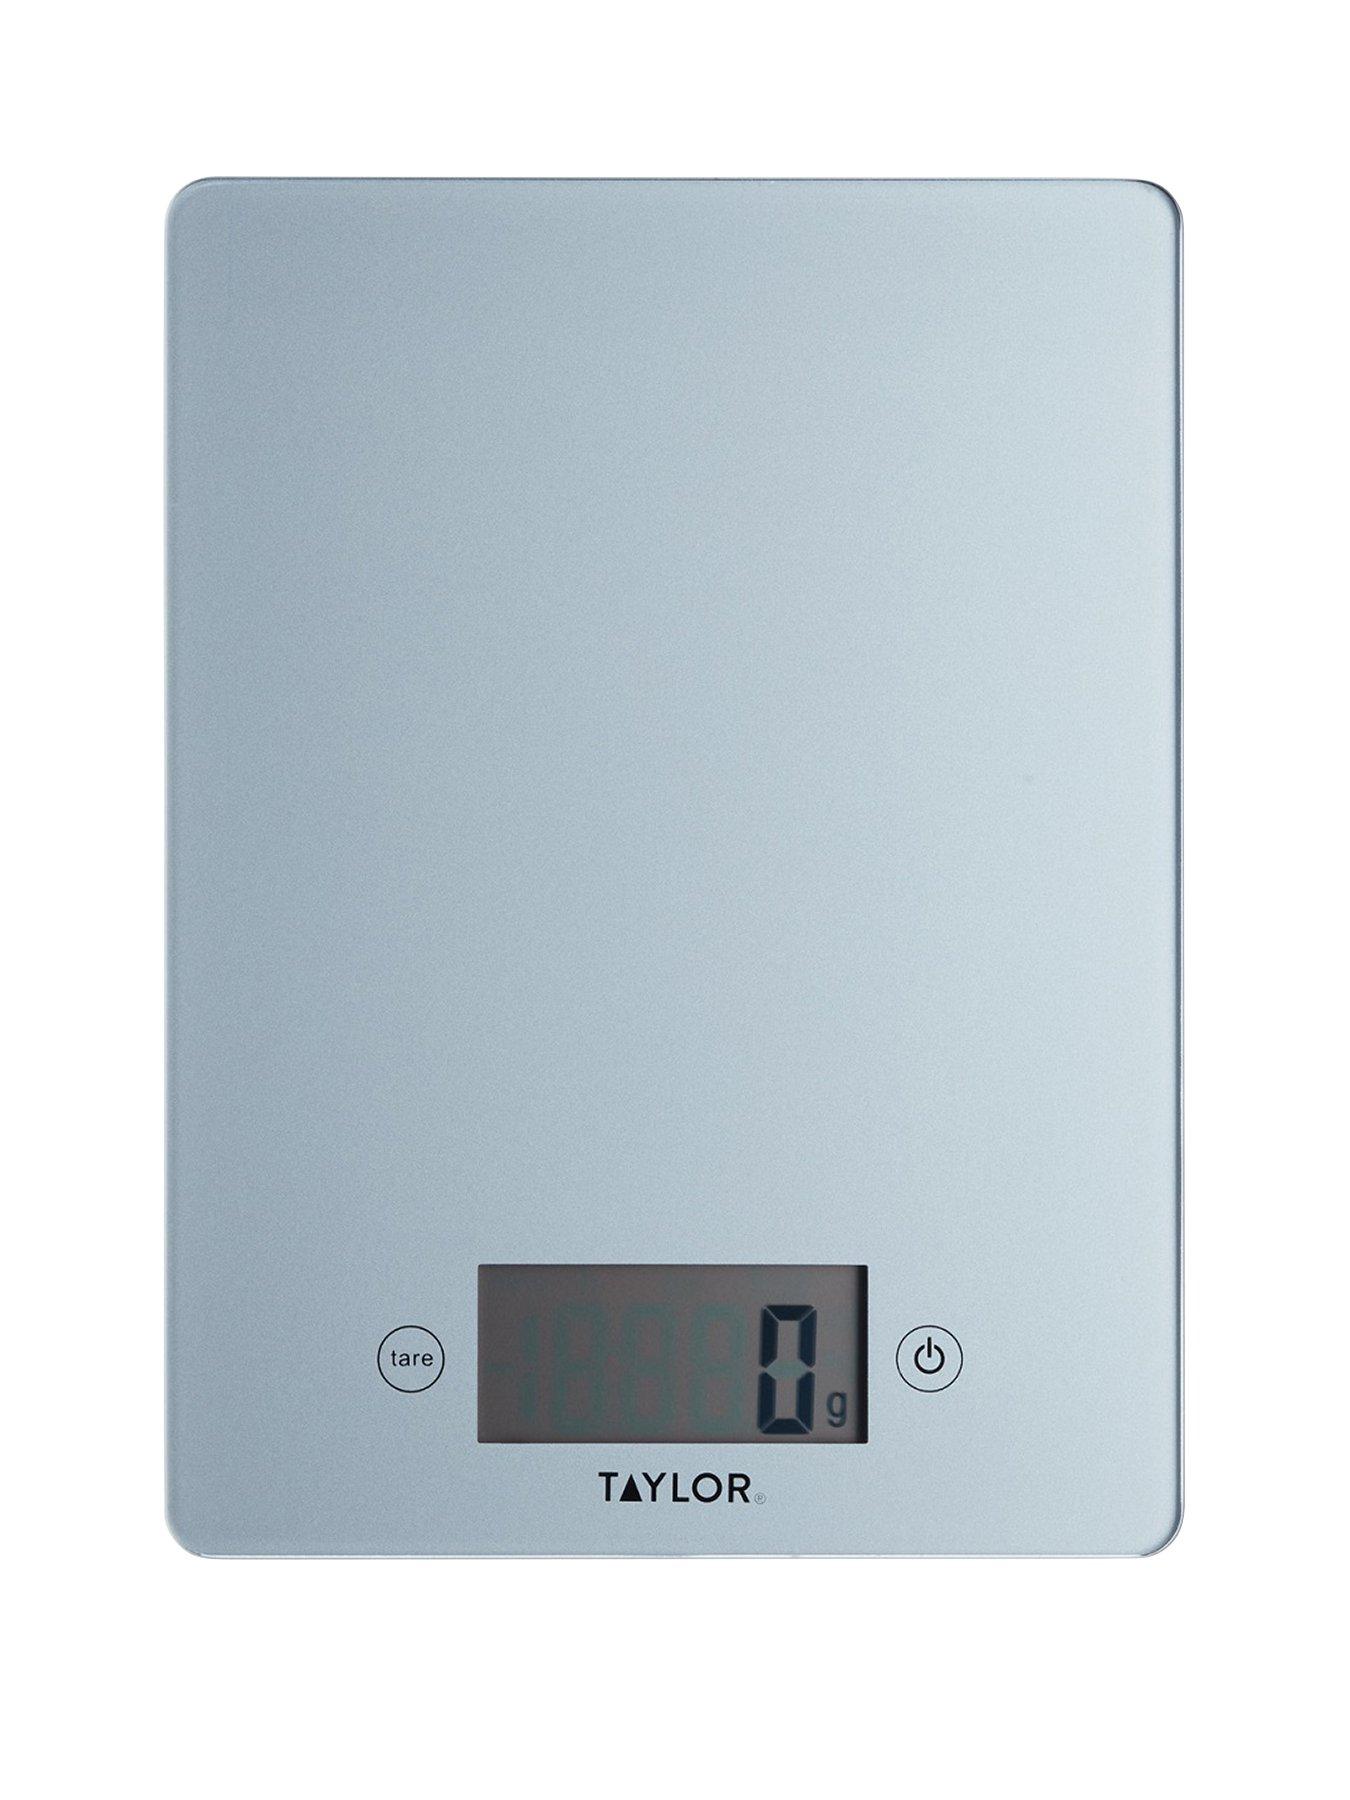 Taylor Modern Mechanical Kitchen Weighing Food Scale Weighs up to